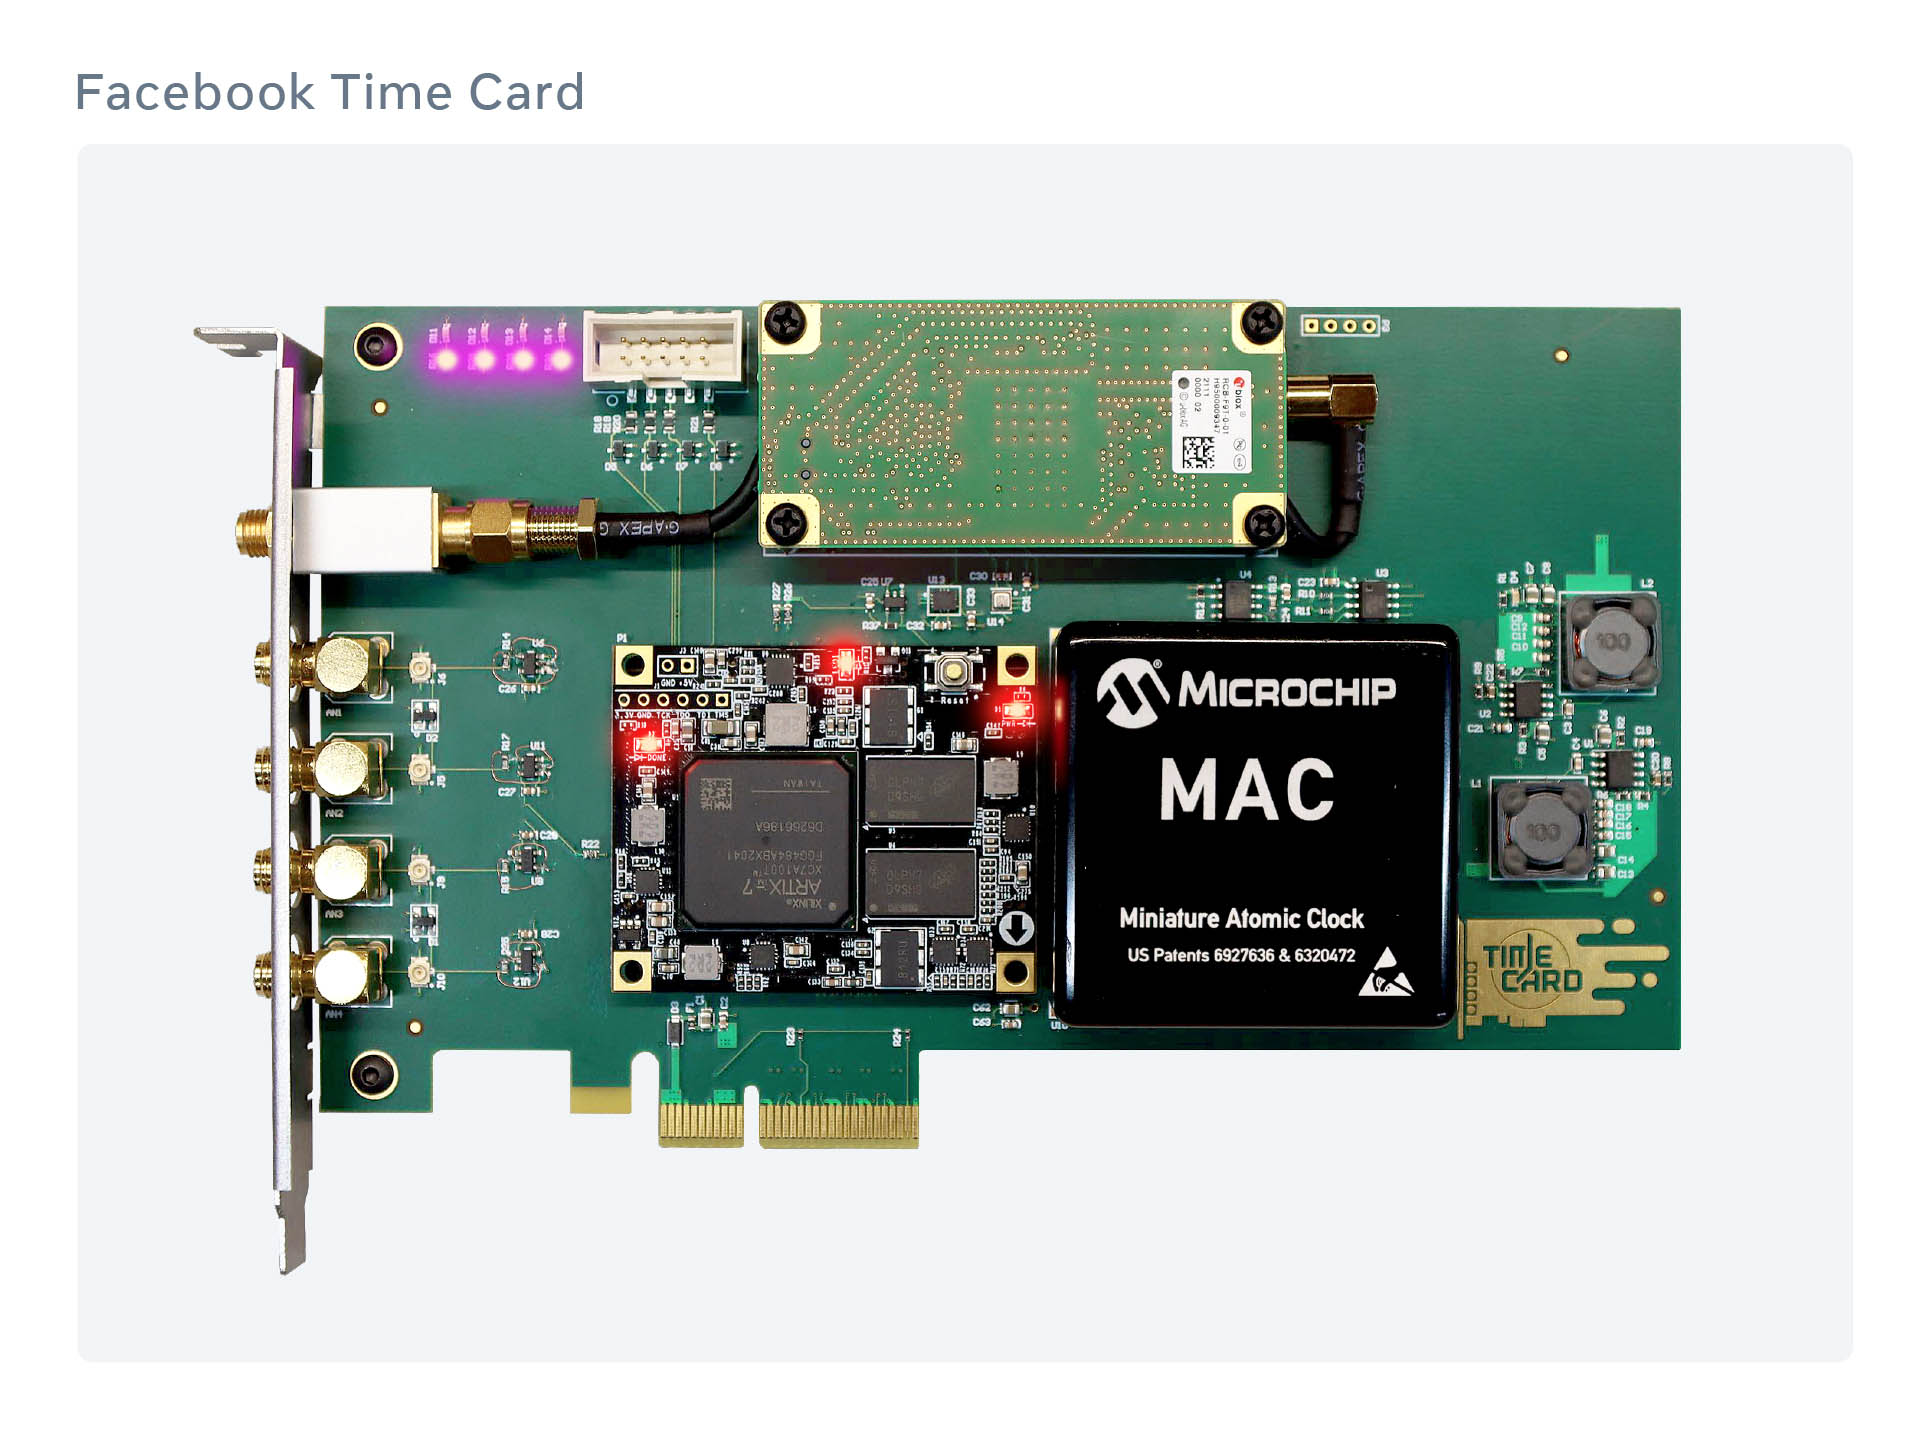 Image of the time card prototype